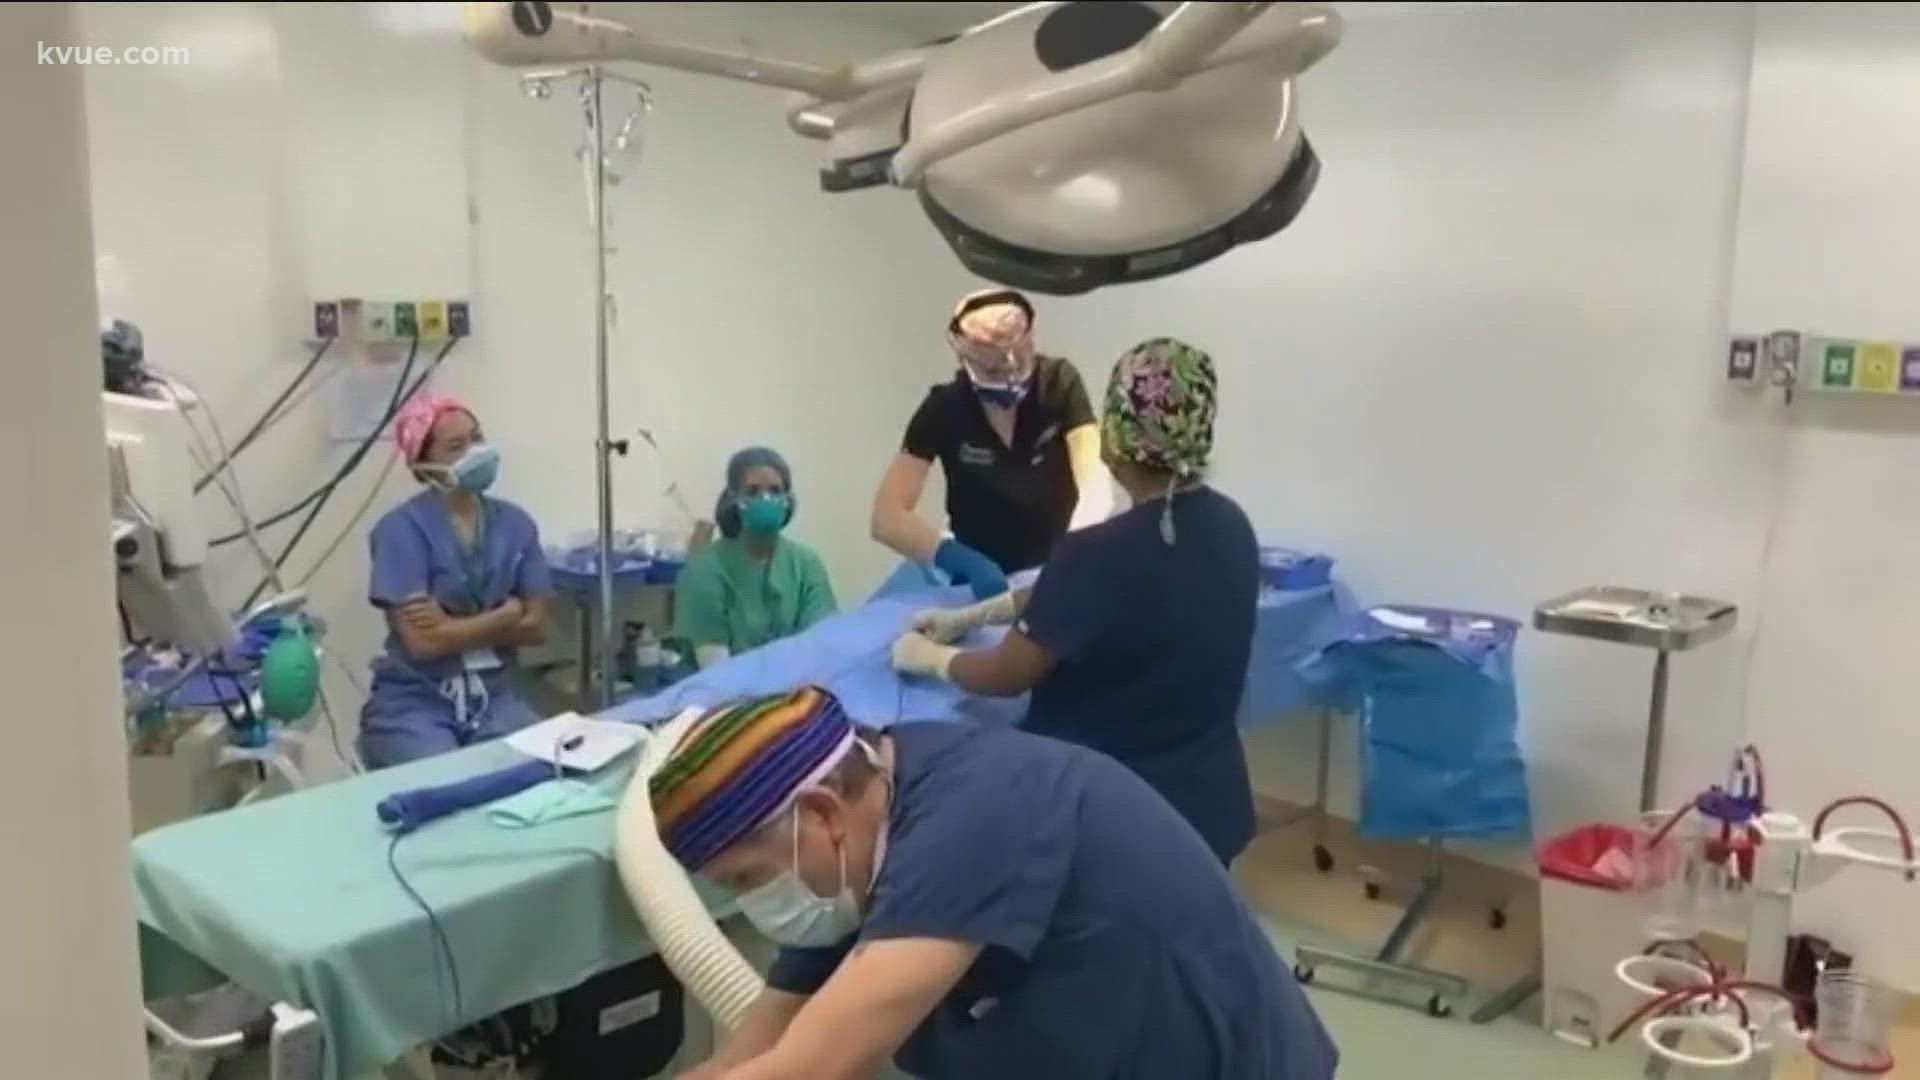 A team of nearly two dozen volunteers is wrapping up a trip to Guatemala City where they have spent the last week performing life-changing surgeries for children.